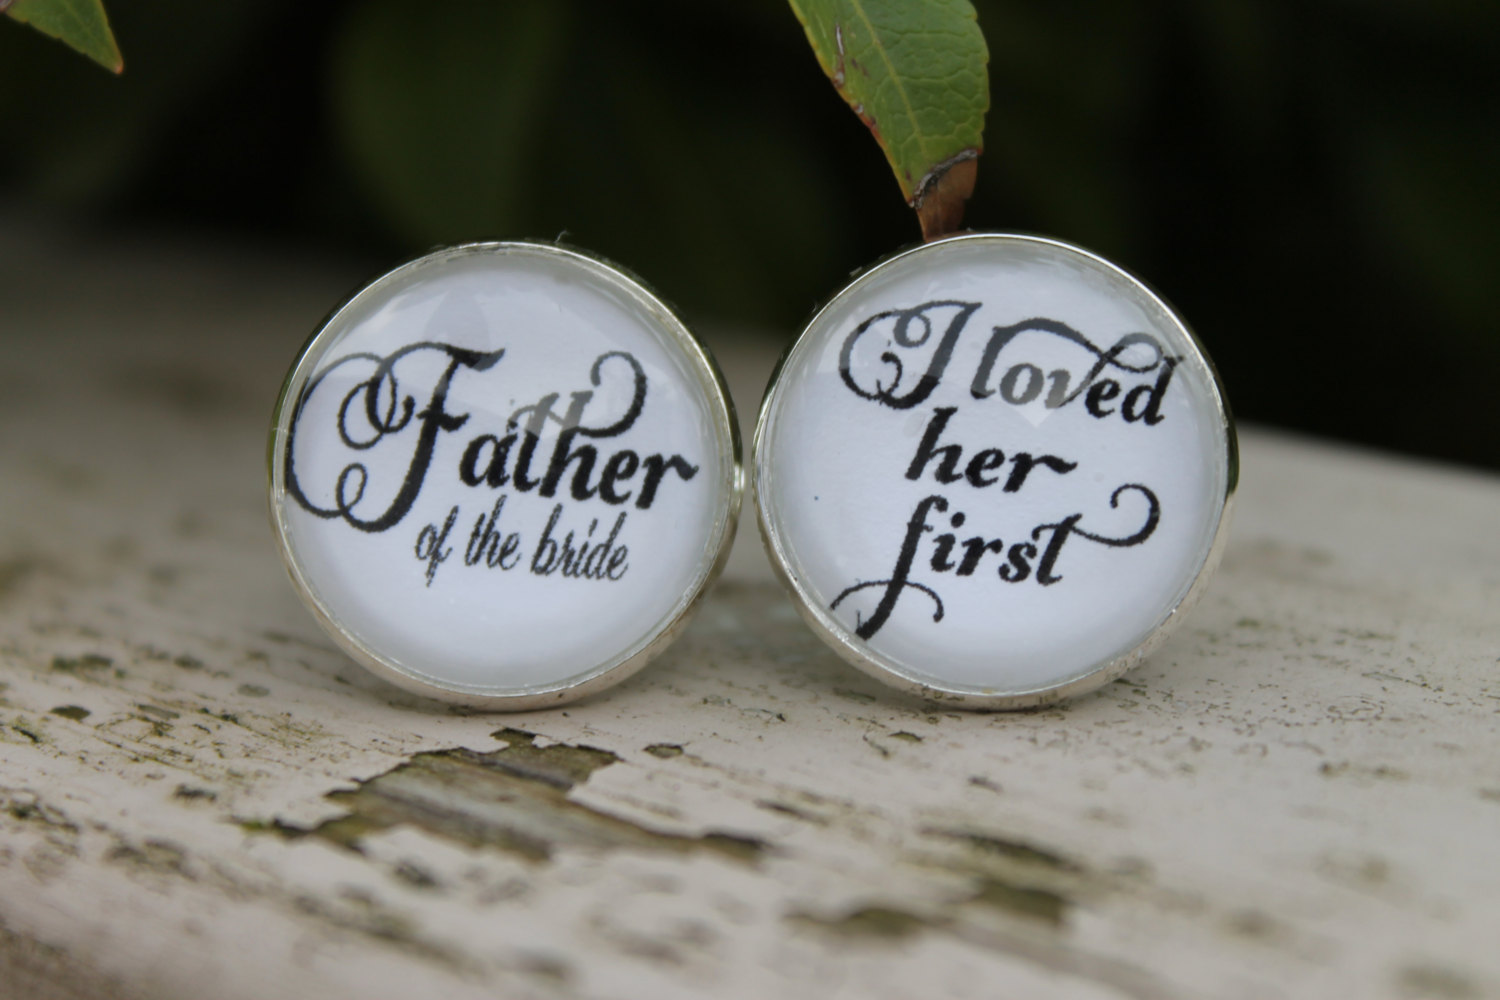 father of the bride cuff links i loved her first